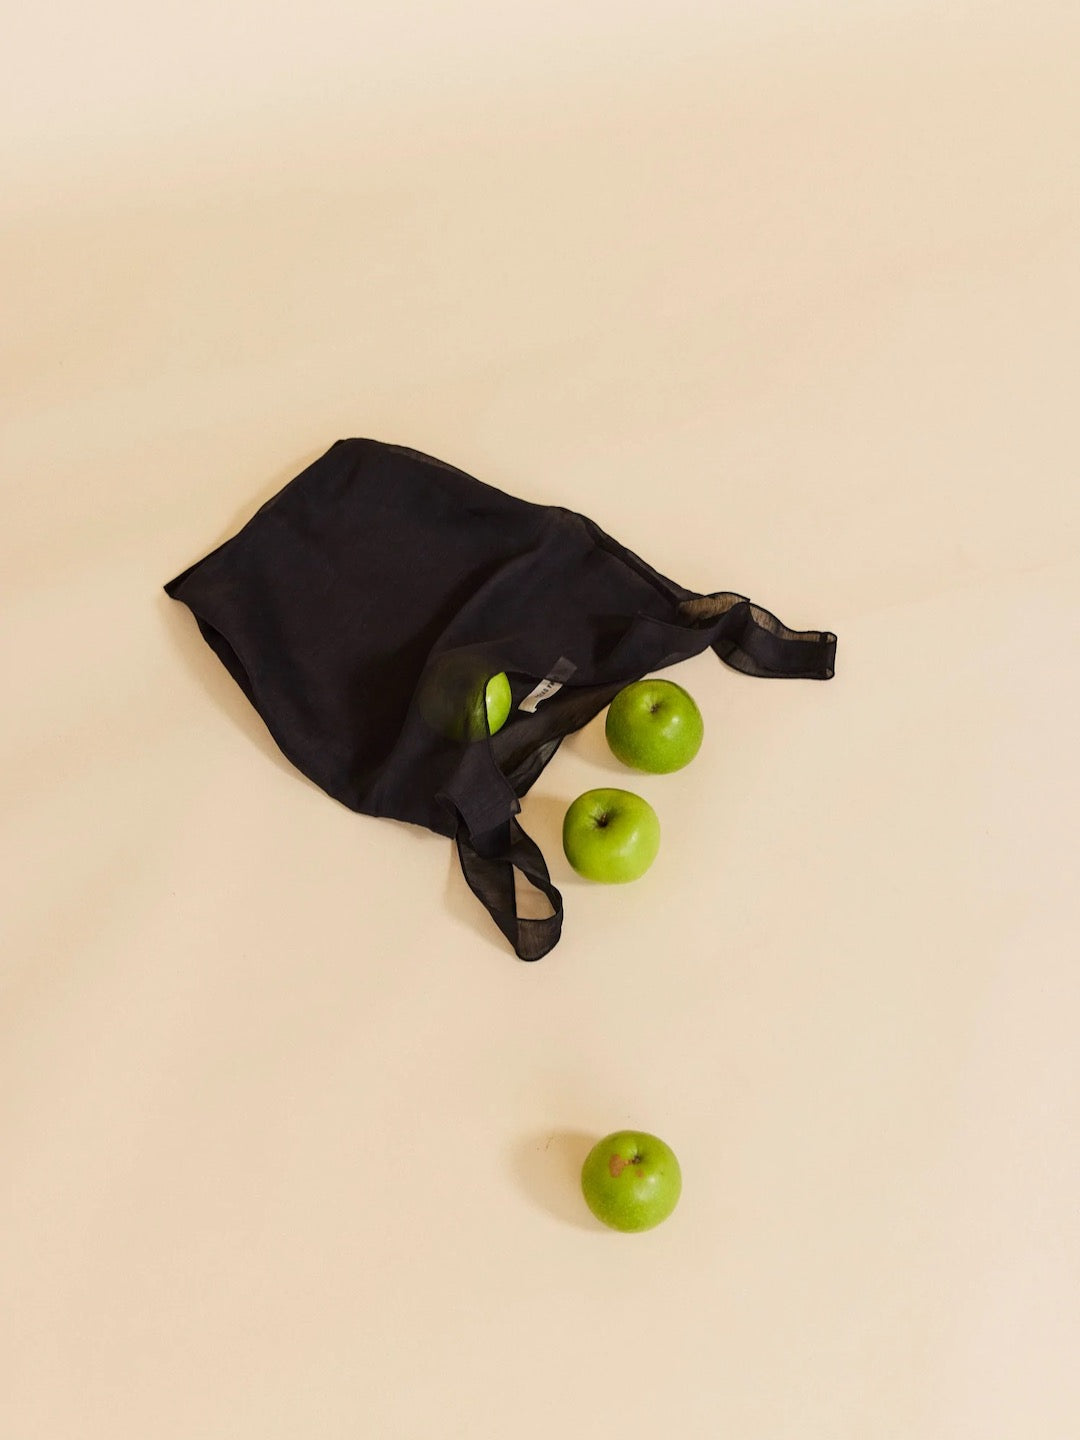 A Wander Bag - Onyx by OVNA OVICH with green apples on it.